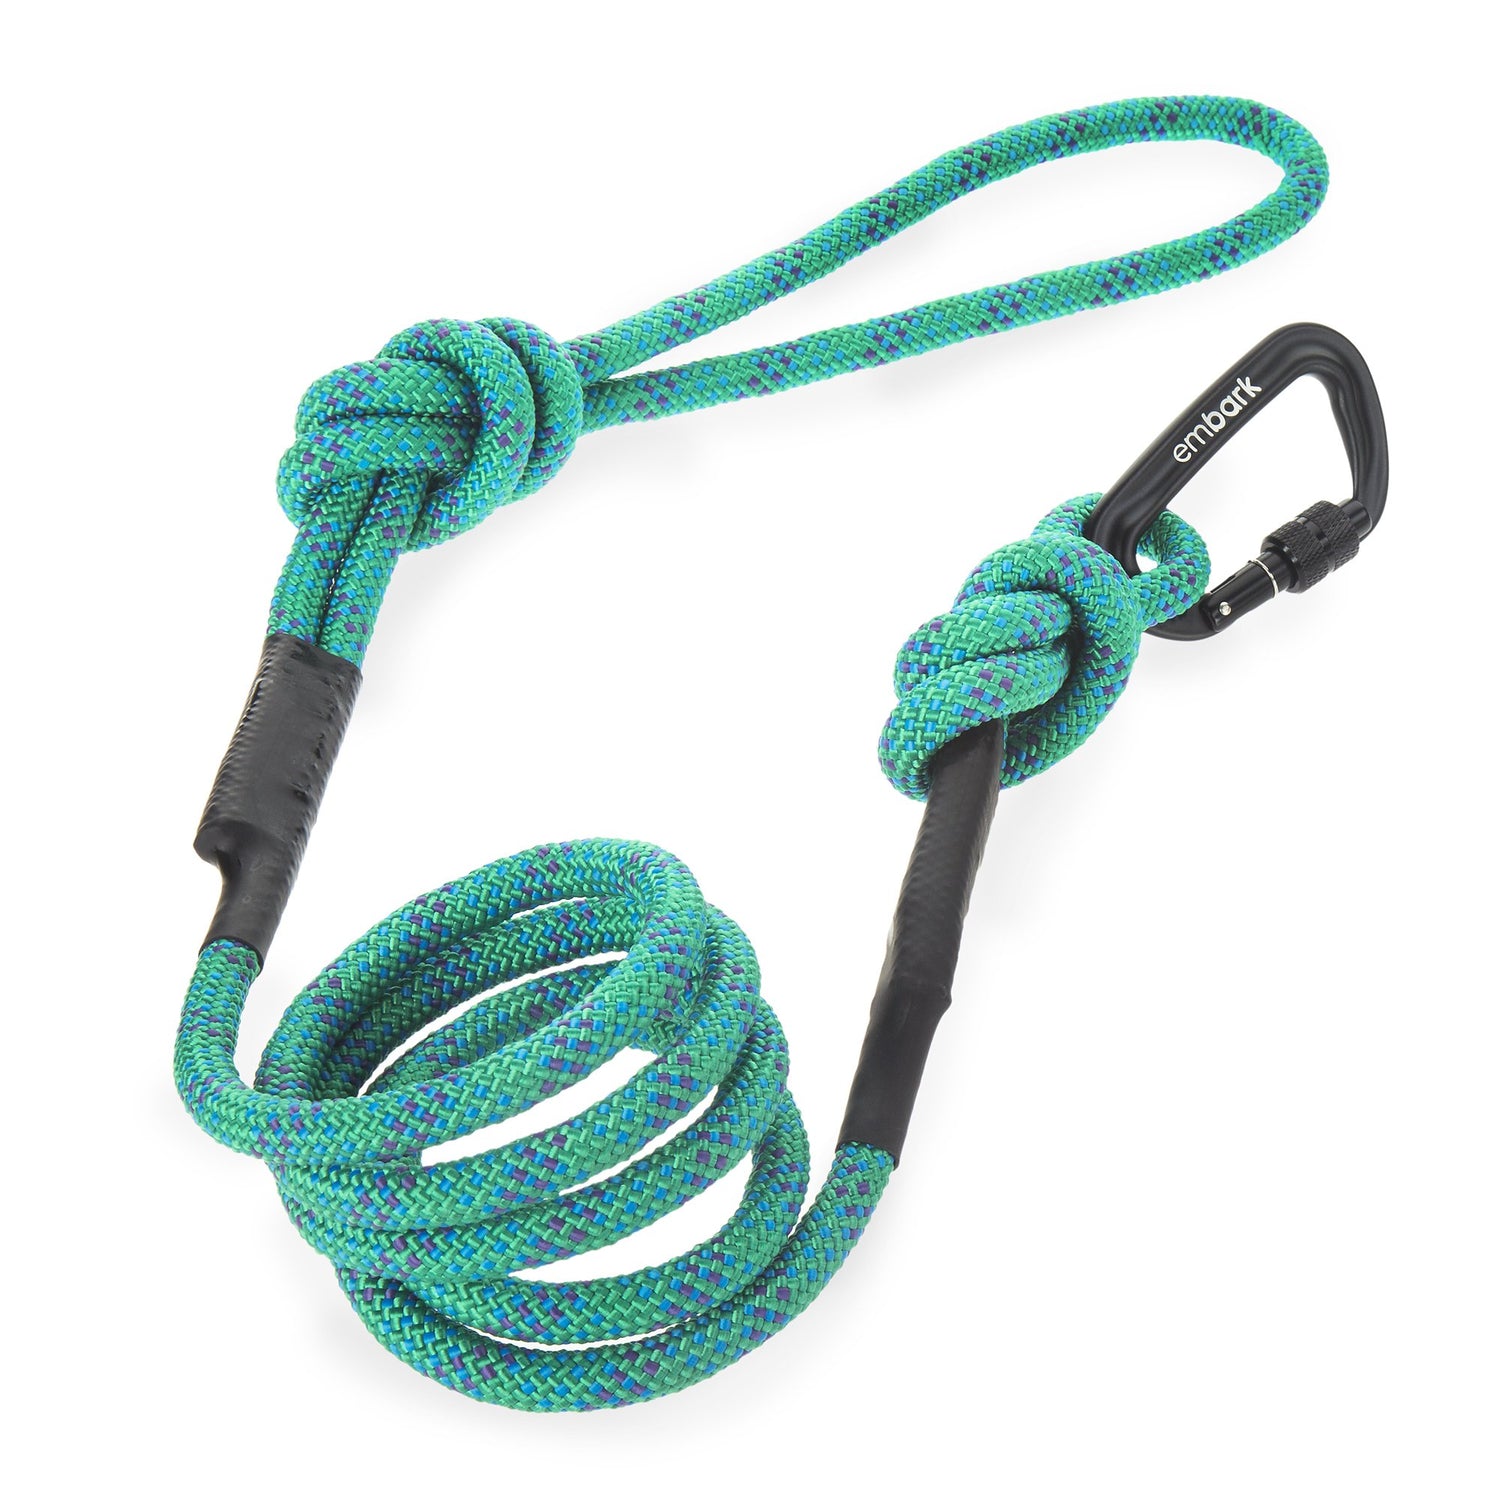 Sierra Climbing Rope and Carabiner Dog Lead